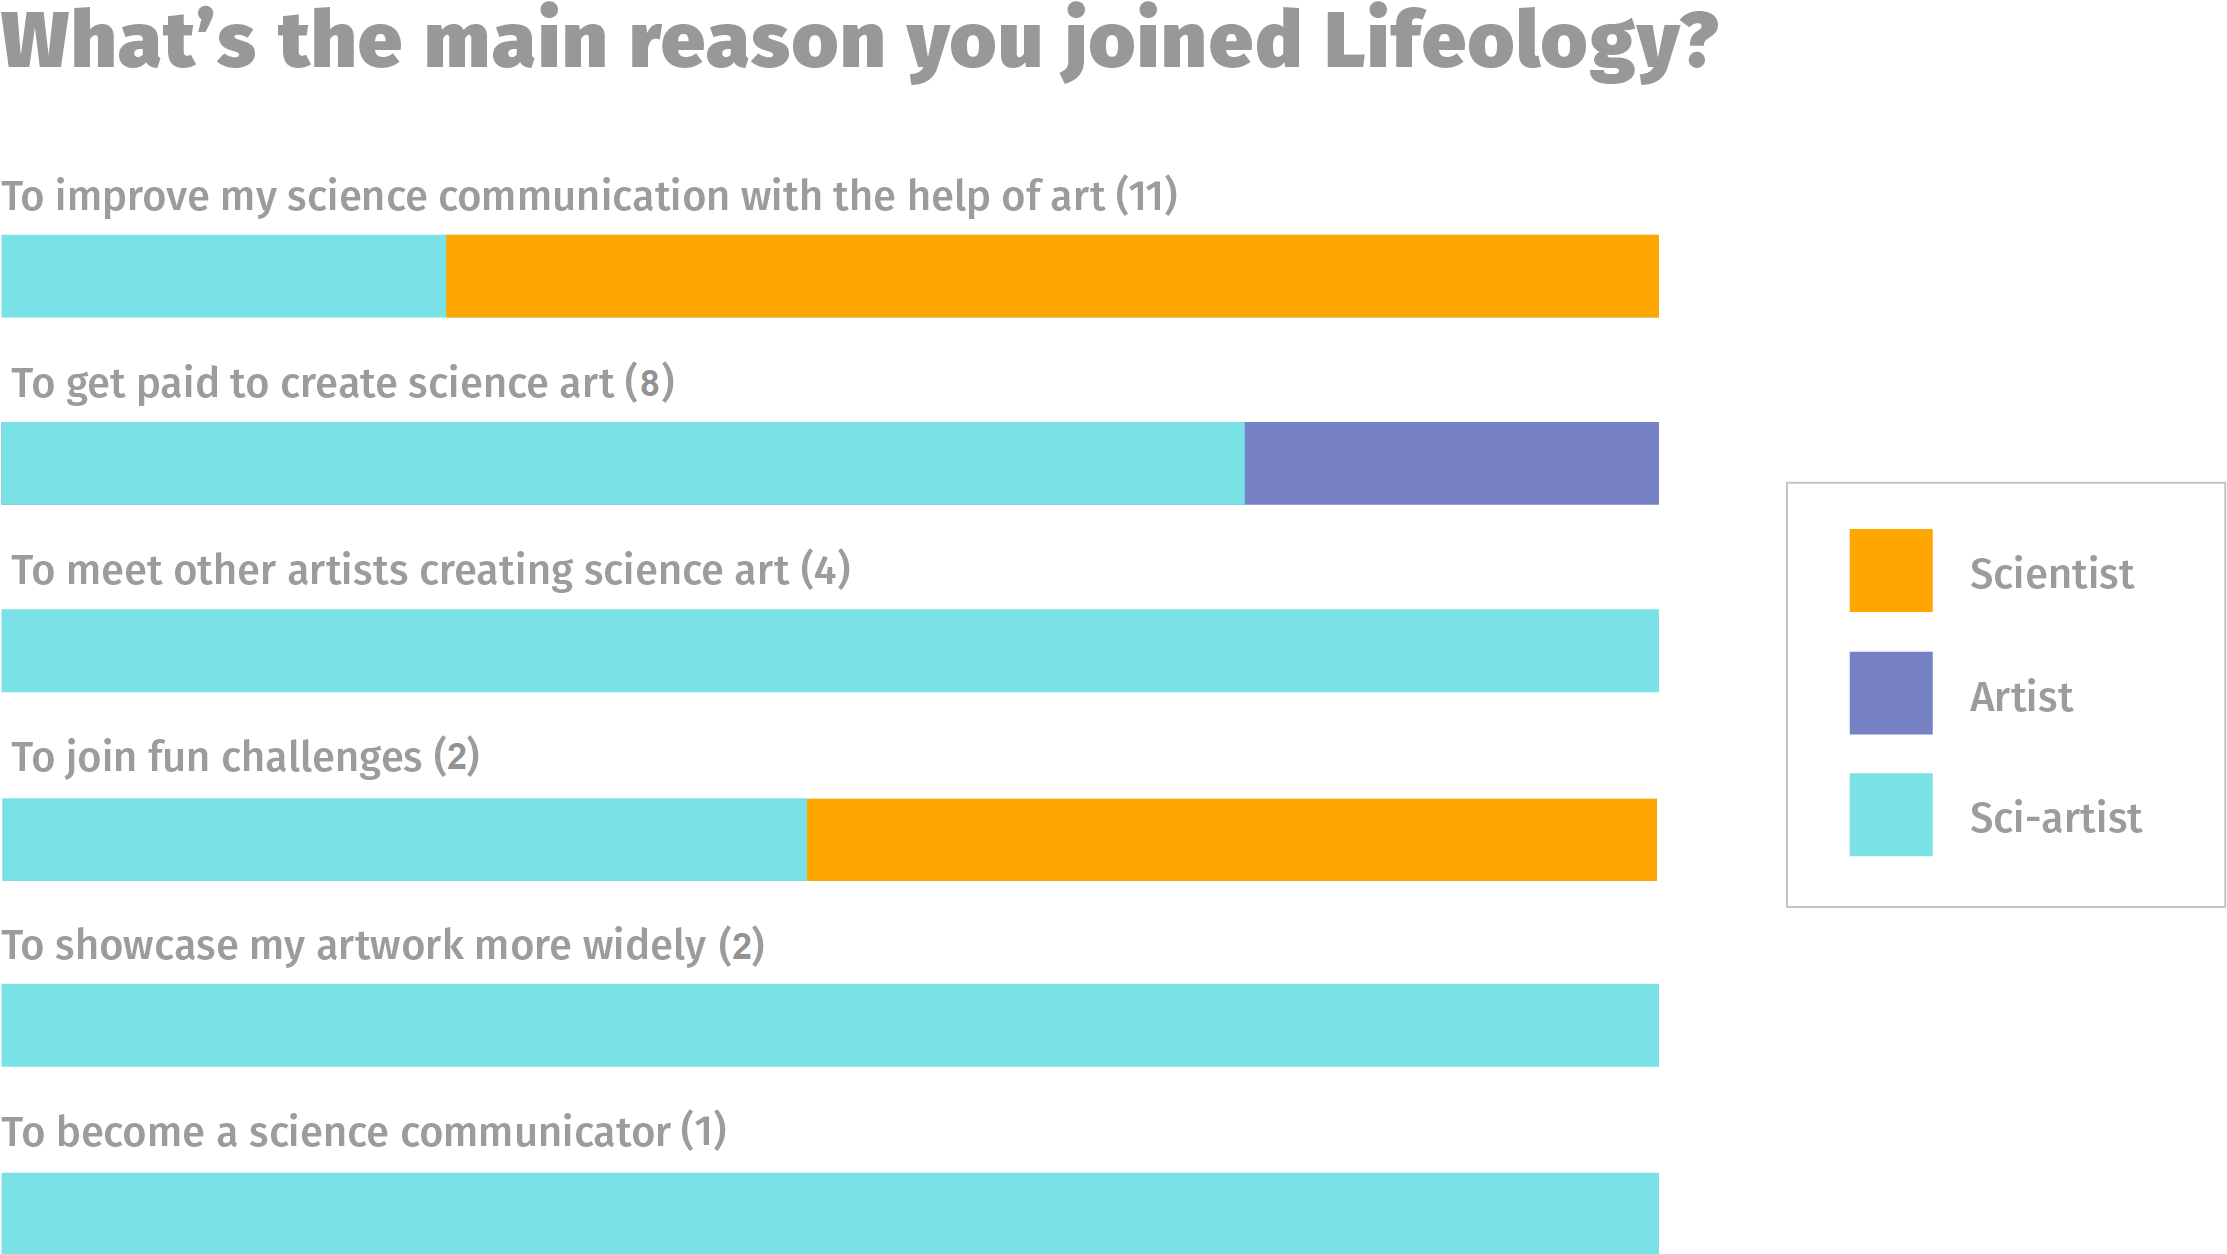 Lifeology data - reason for joining